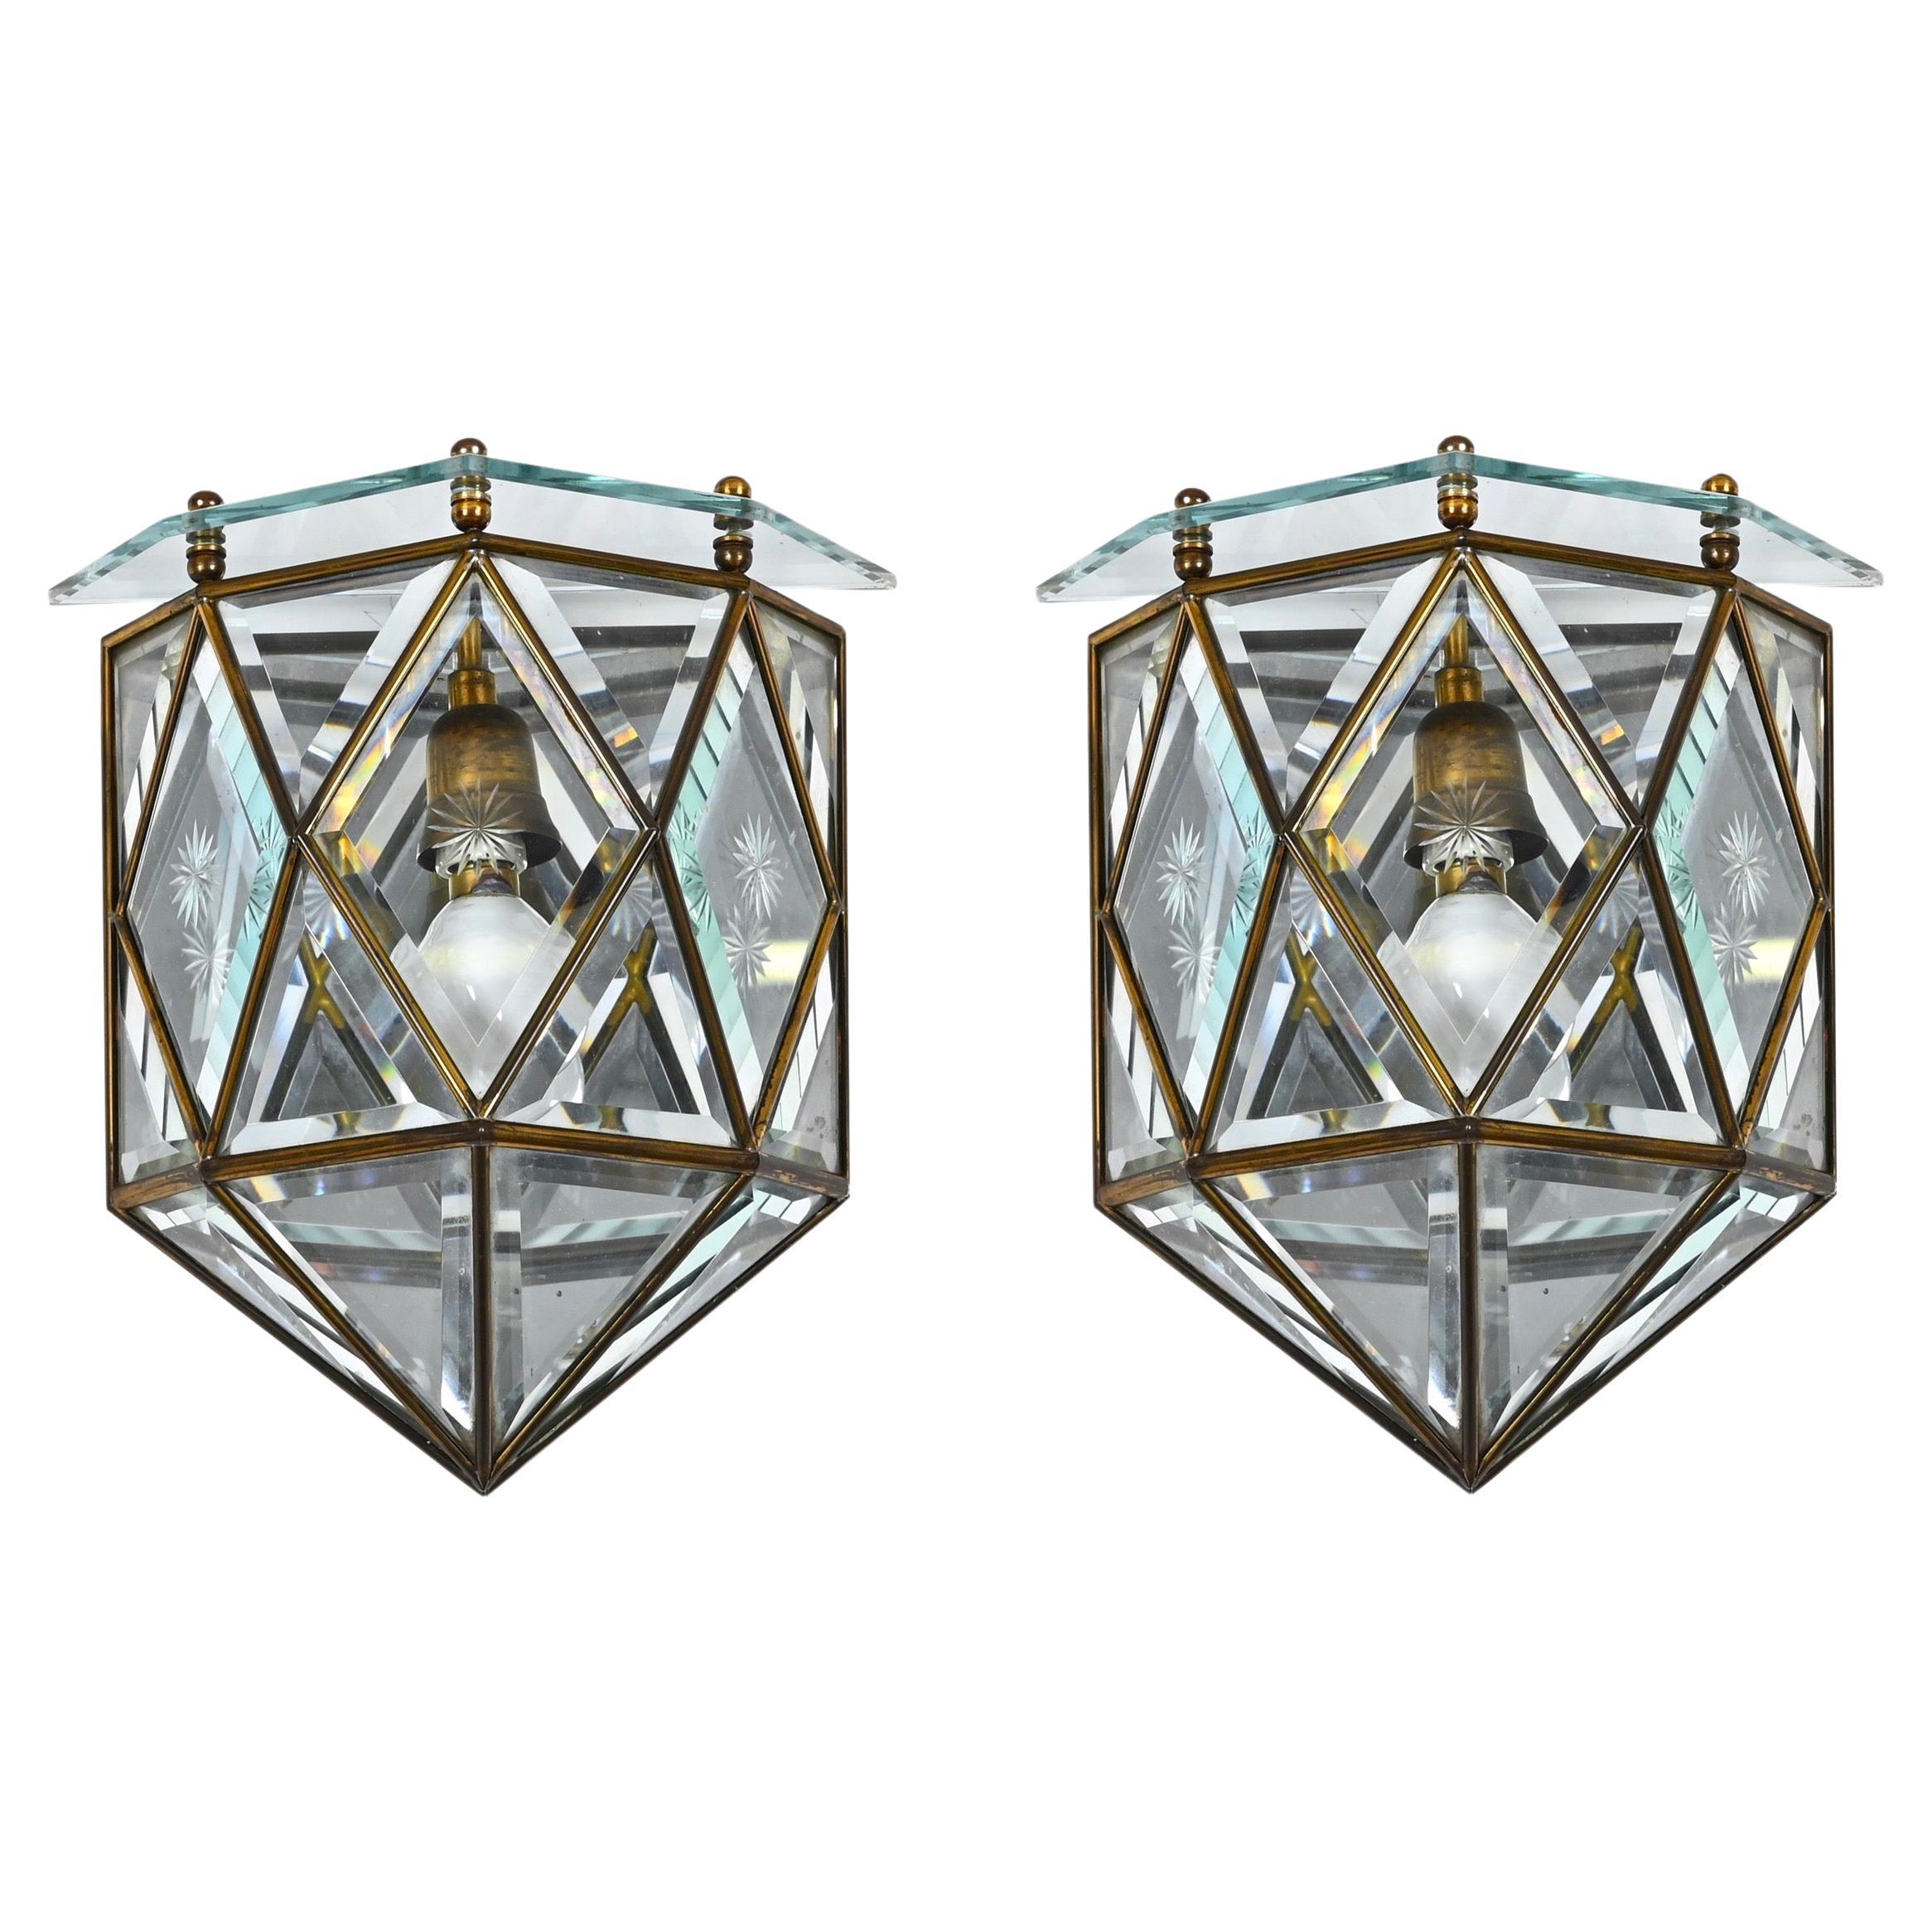 Fontana Arte Pair of Sconces in Beveled Glass, Brass and Mirror, Italy, 1940s